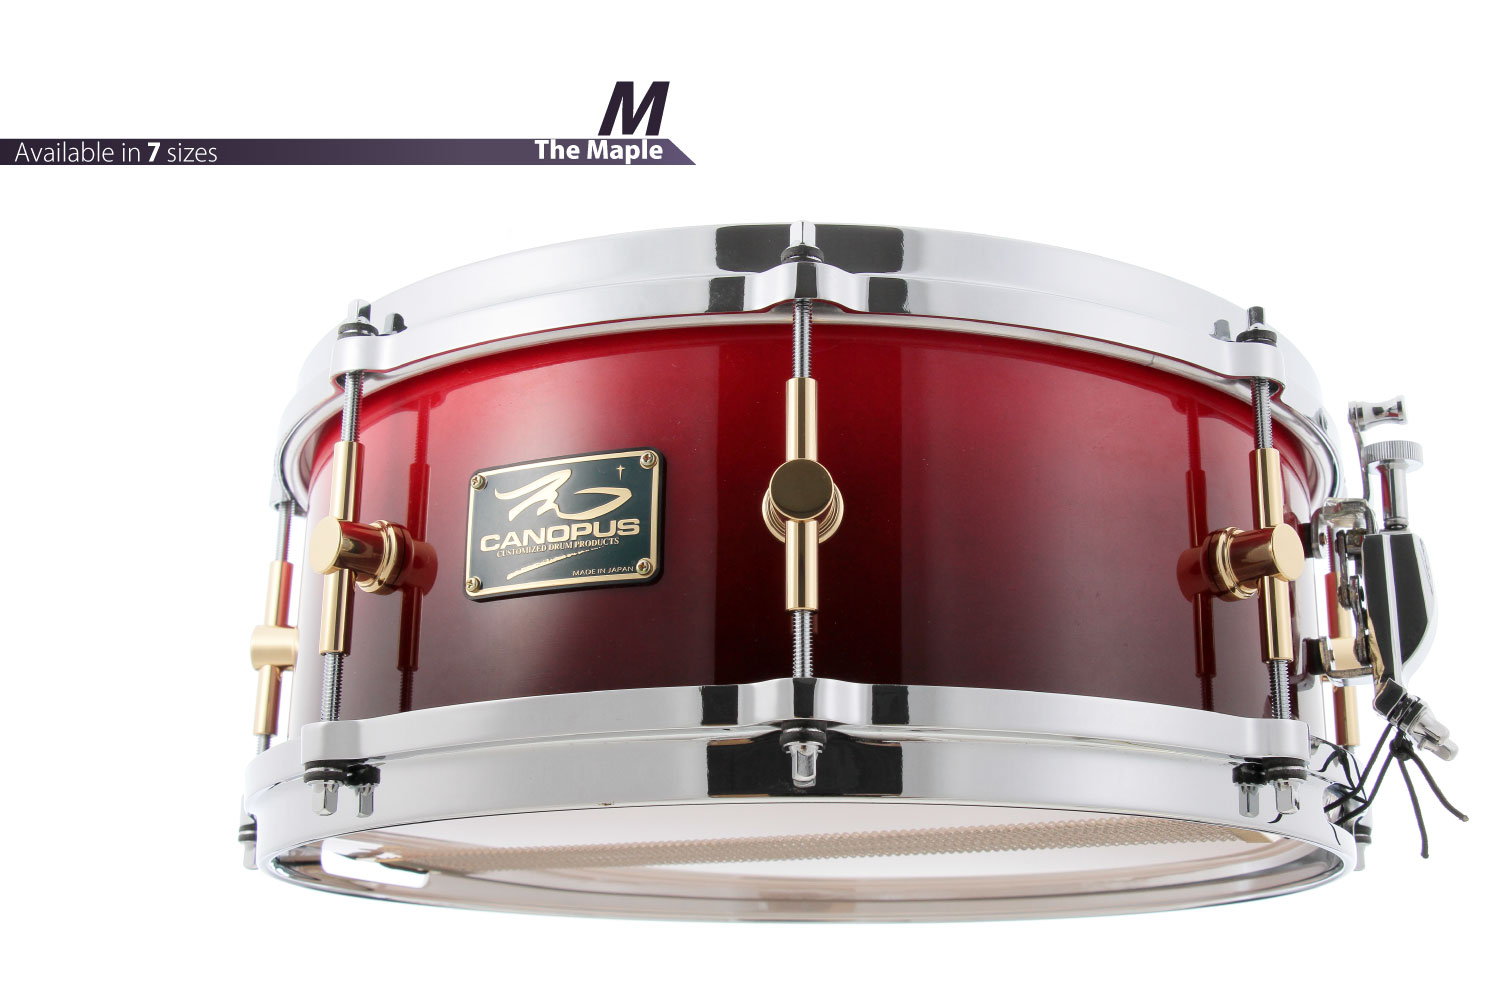 The Maple Snare Drum